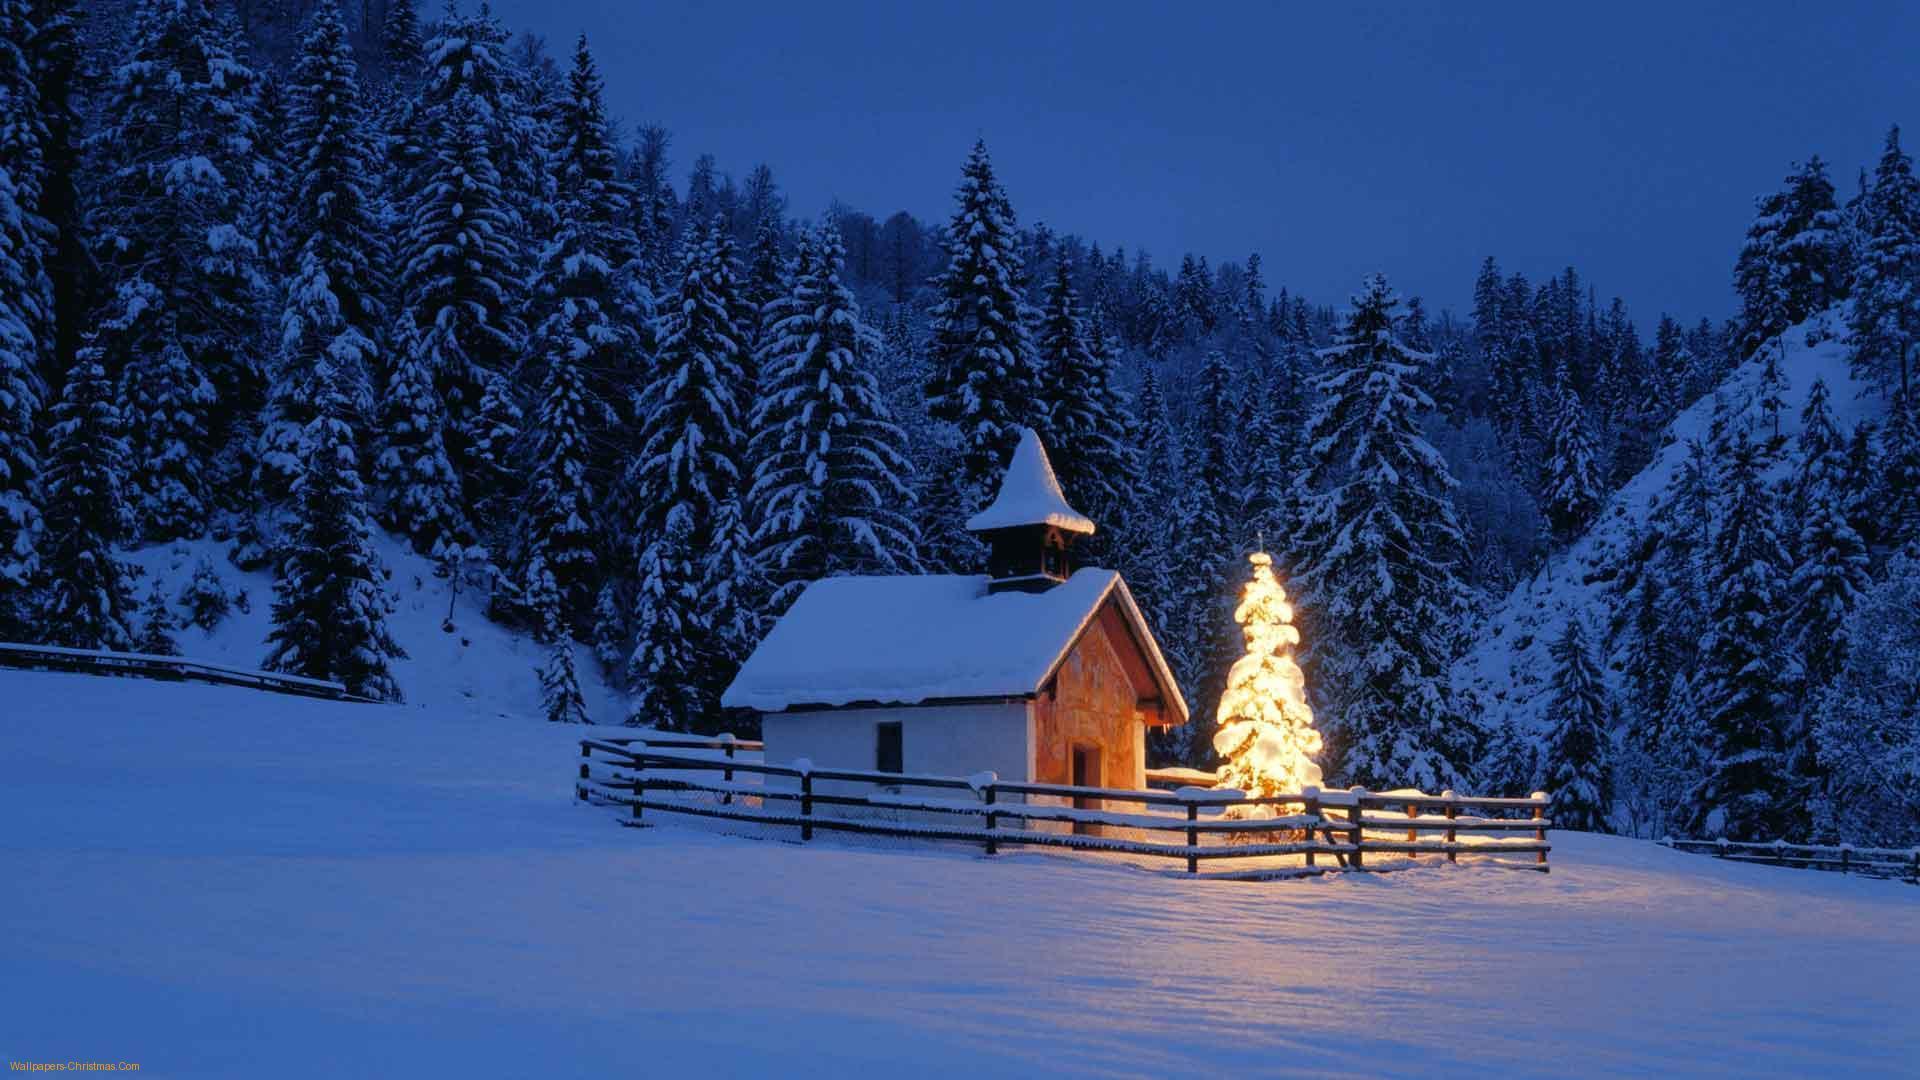 Wallpapers For > Christmas Tree Snow Wallpapers Hd